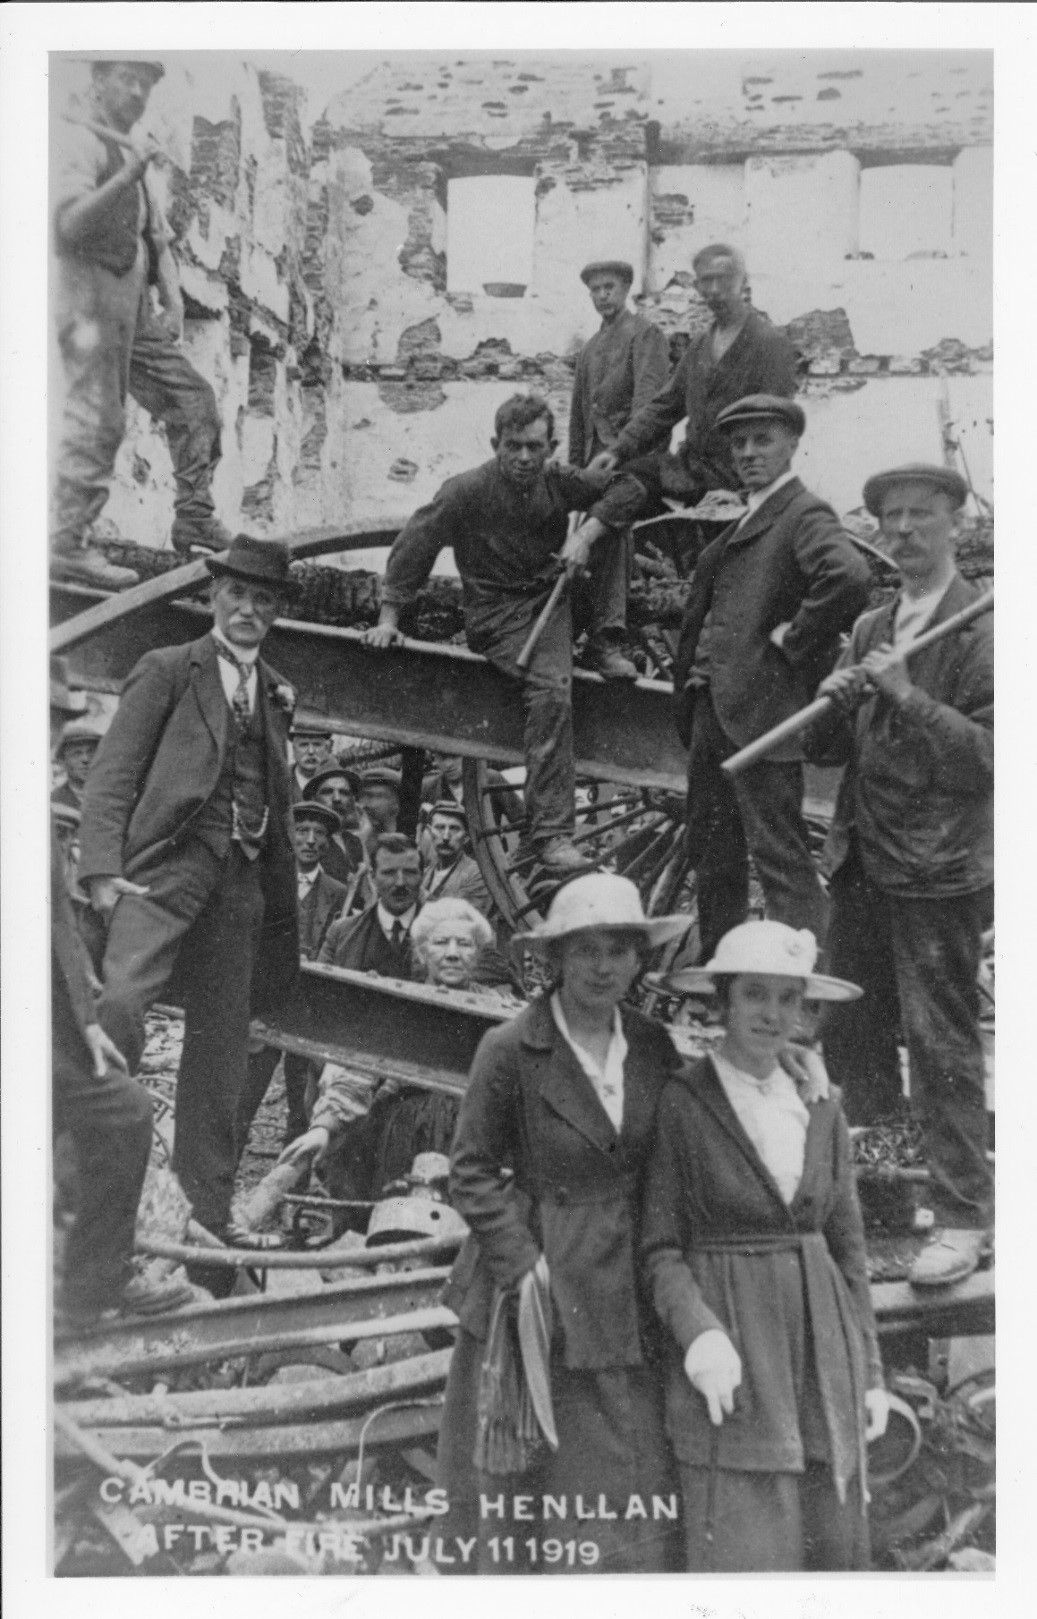 David Lewis on the left of the photograph with the moustache and hat in the remains of Cambrian Mills